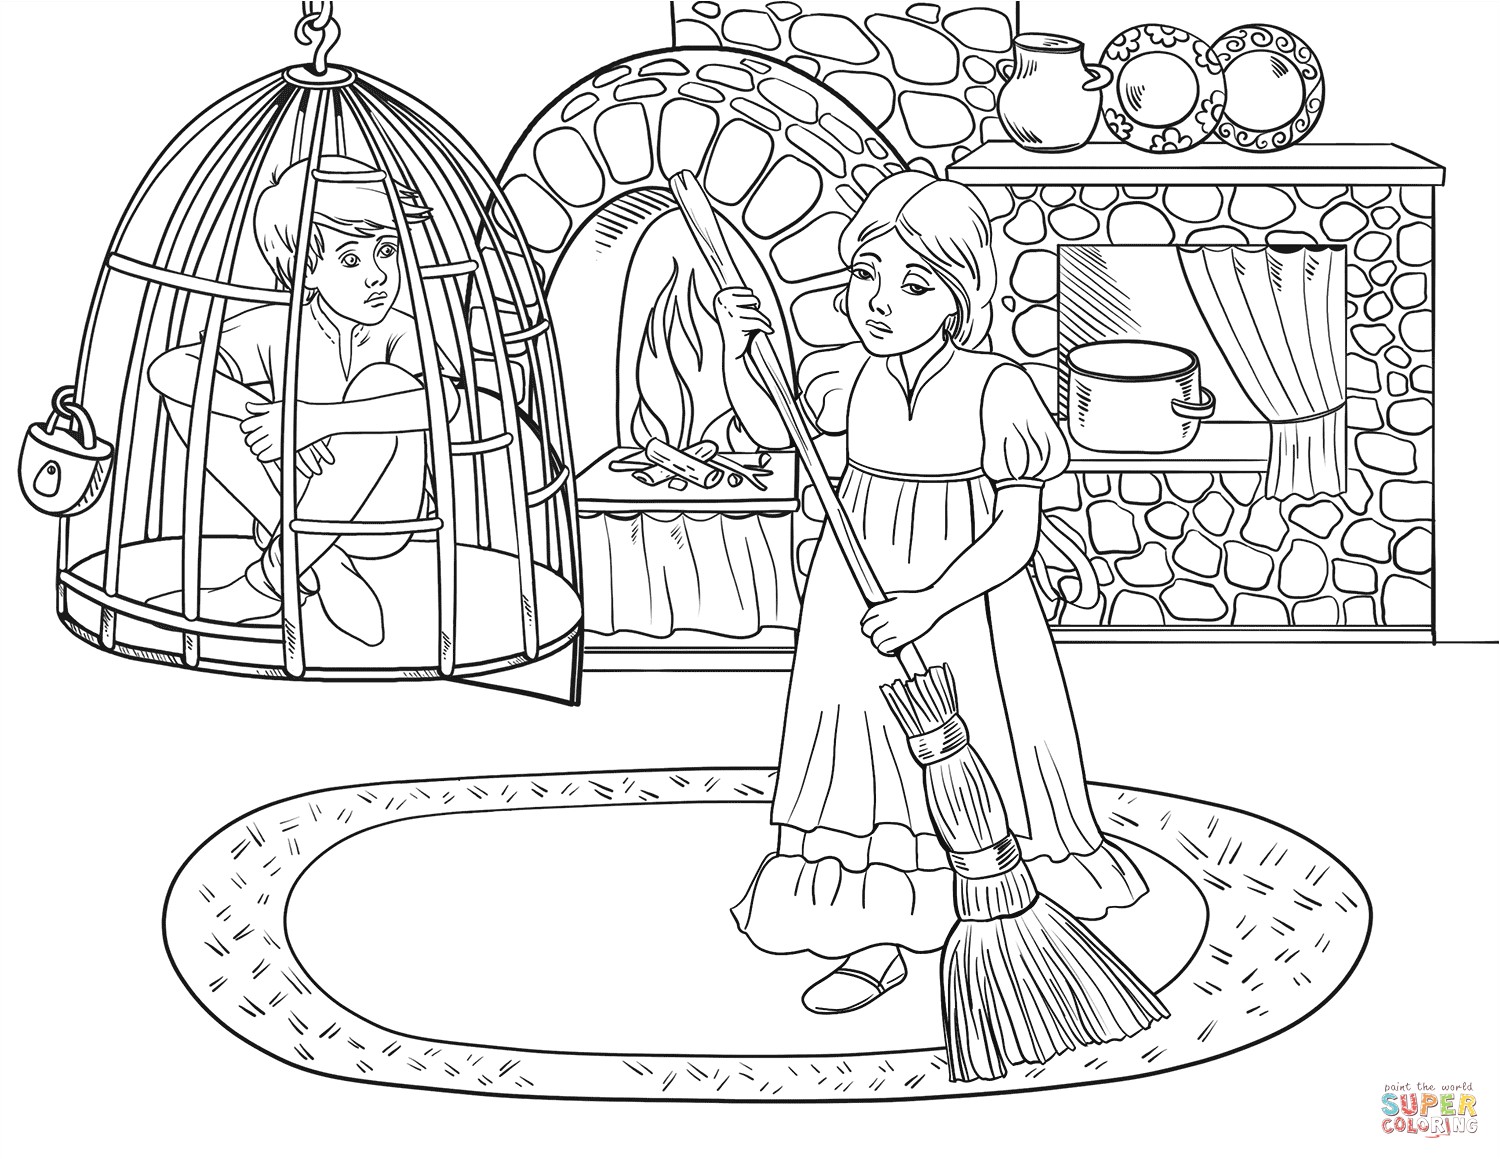 the Hansel is in Cell while Gretel is at Work coloring pages to view printable version or color it online patible with iPad and Android tablets